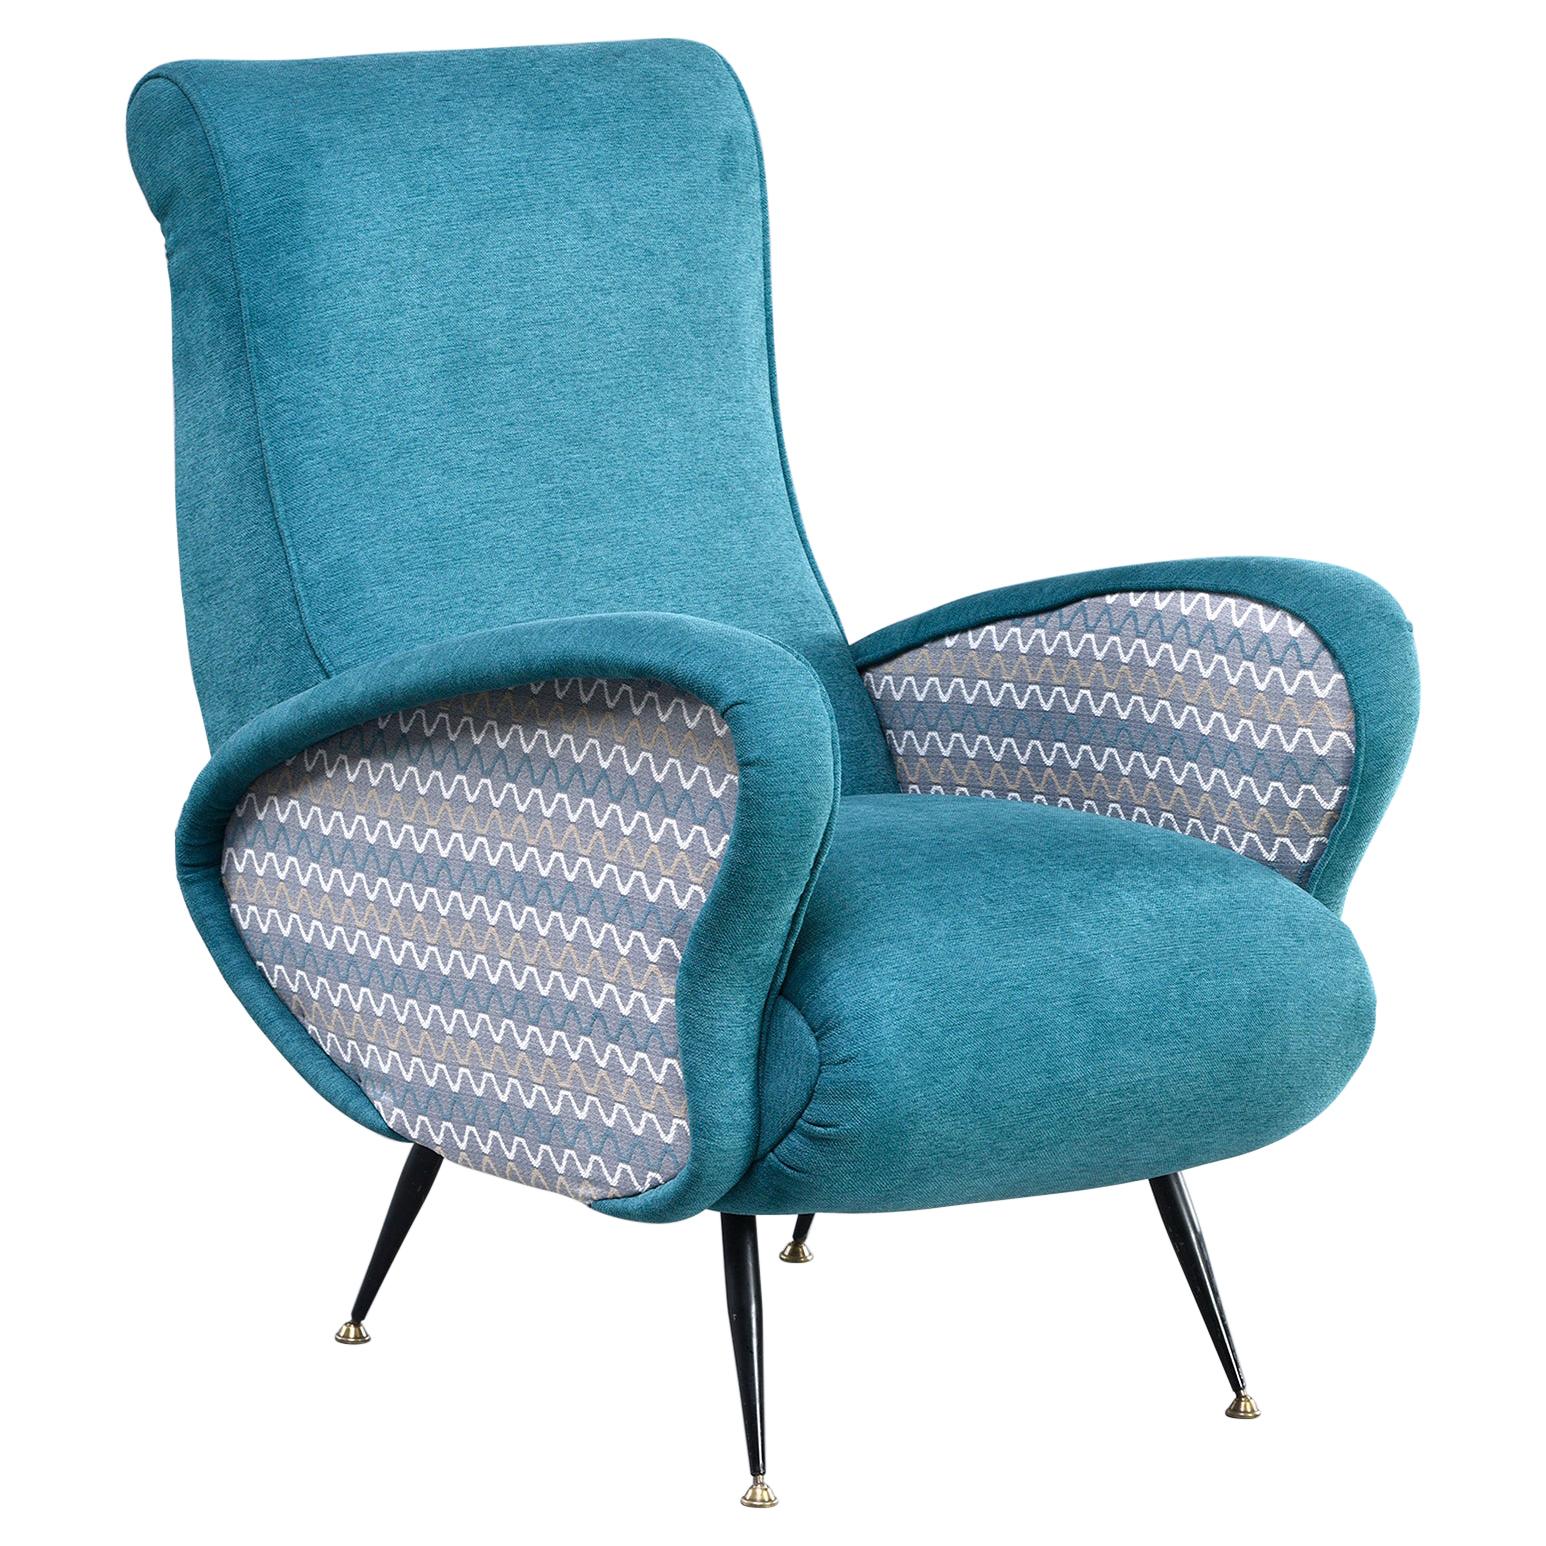 Italian Mid Century Lounge Chair with Two-Tone Upholstery